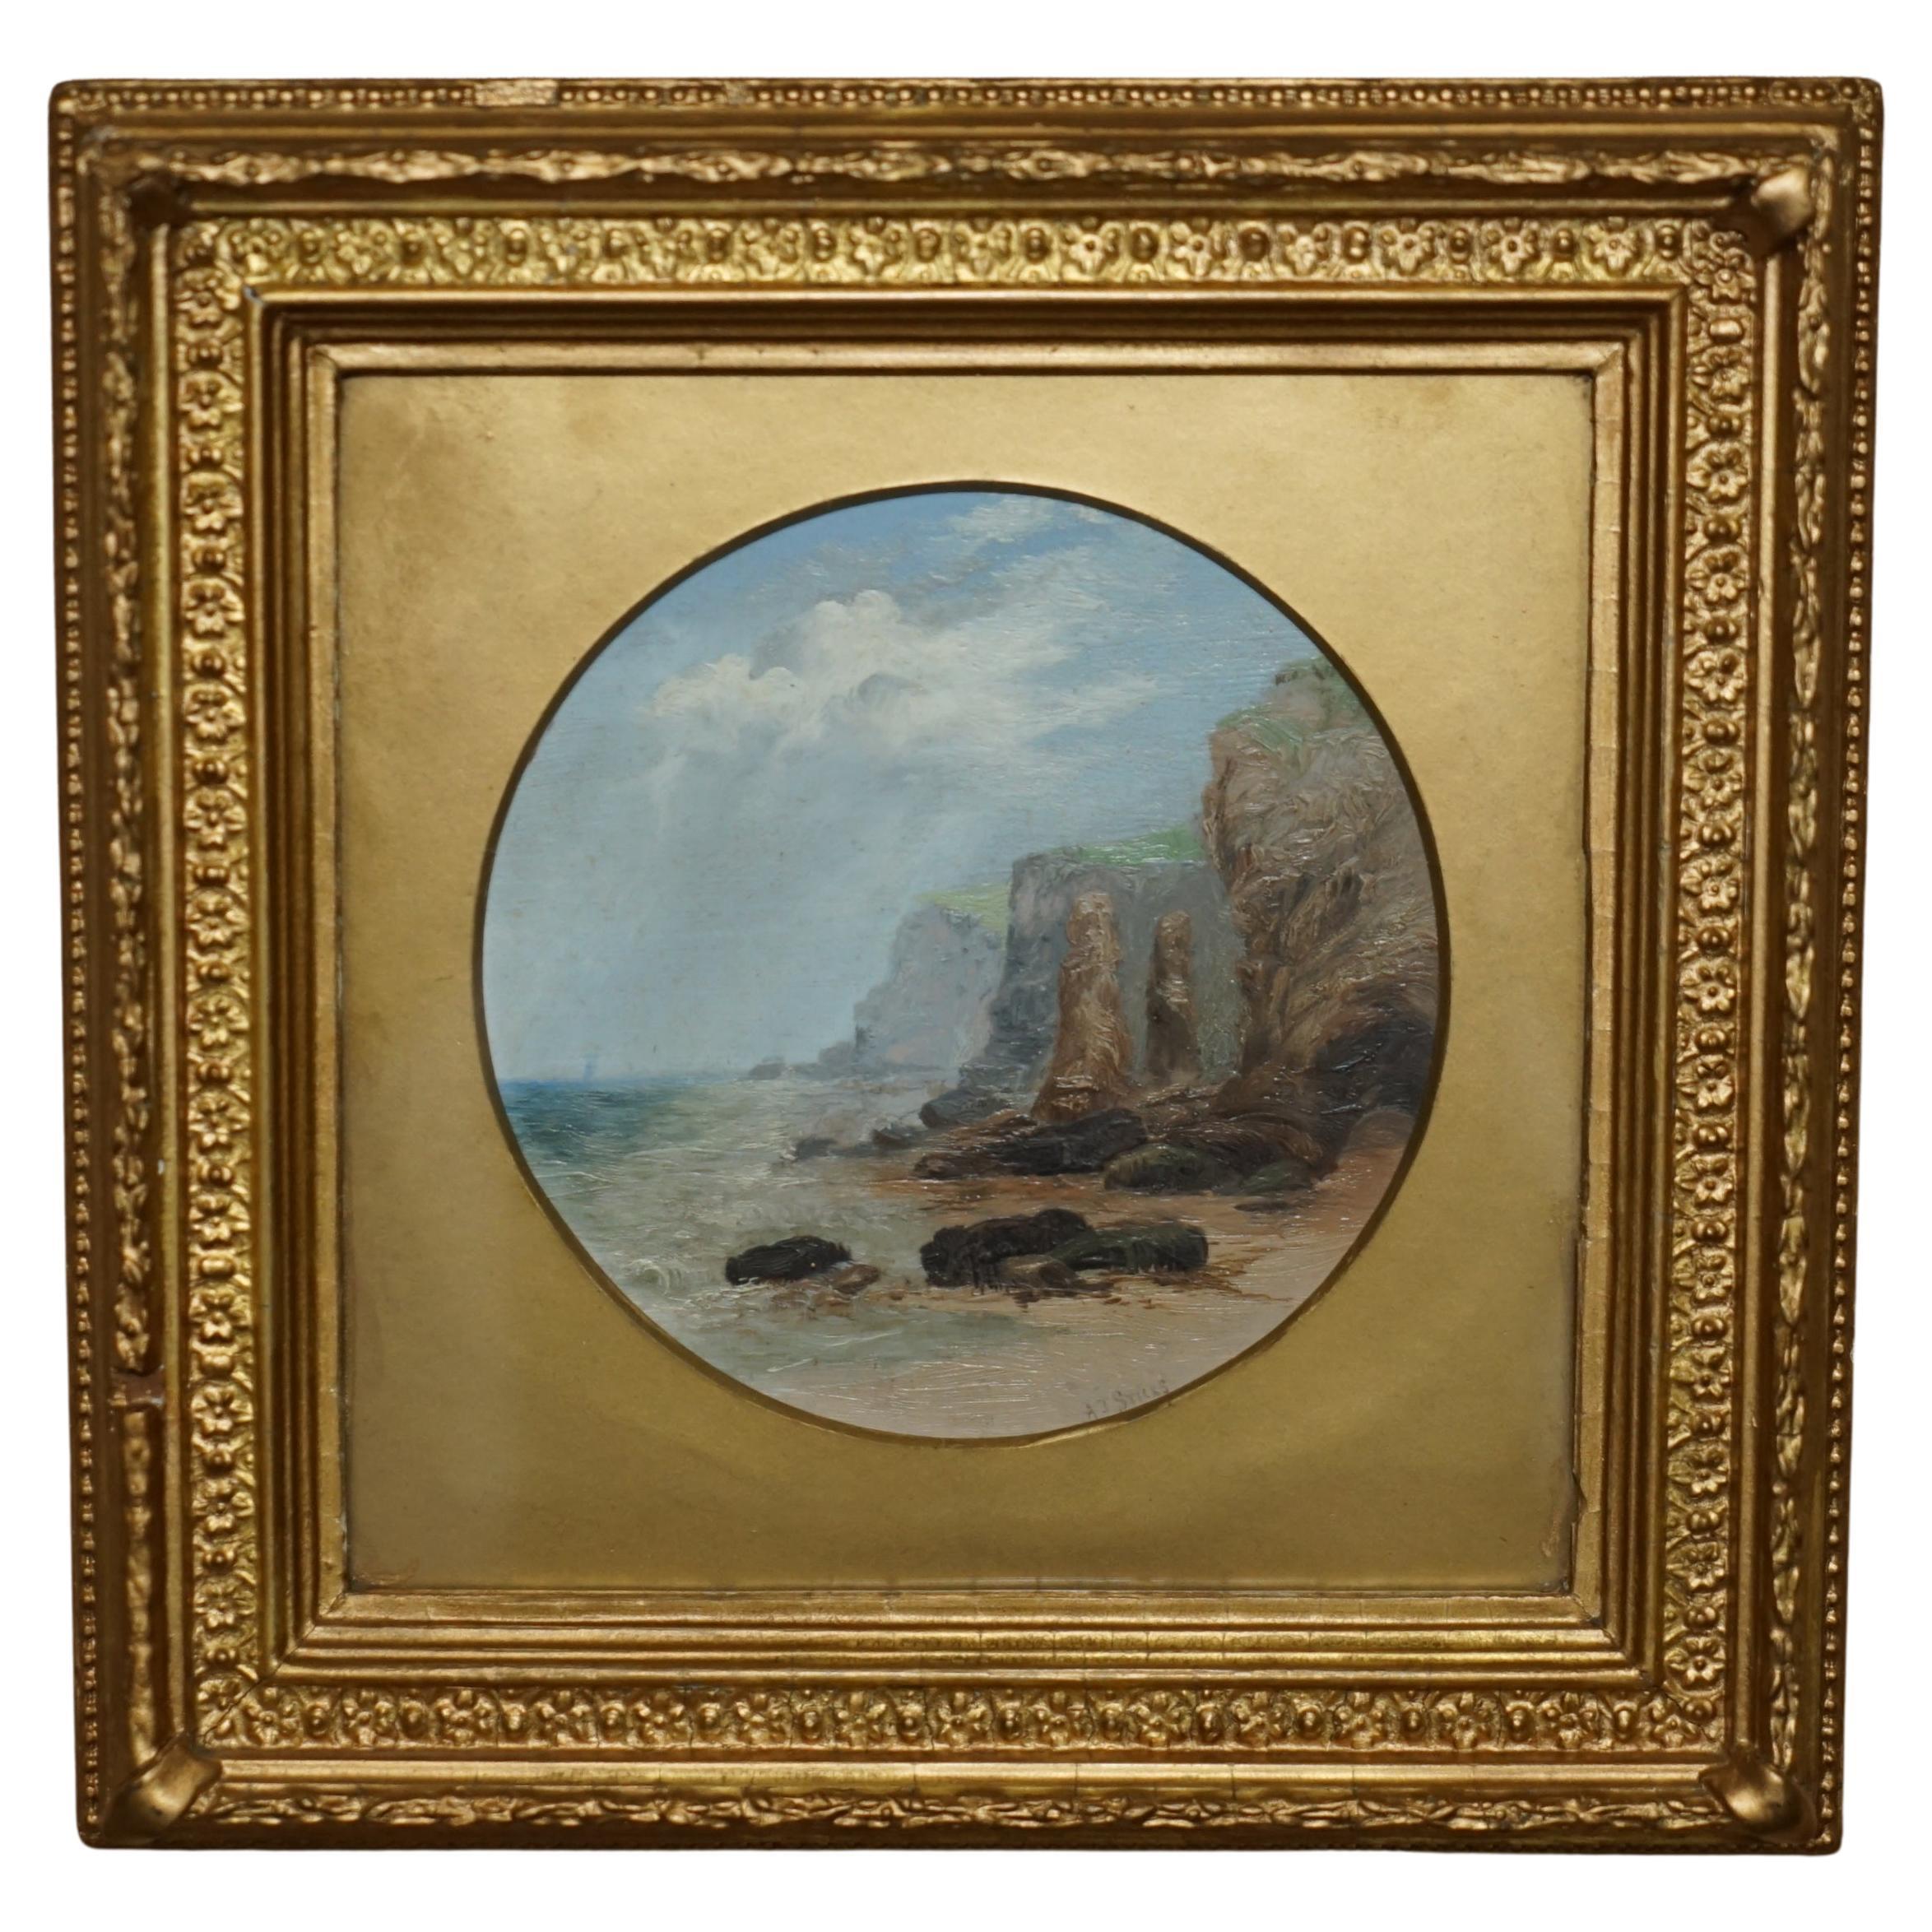 EXQUISITE A J STICKS SIGNED SMALL OIL PAINTING FRAME BY S L NIELSEN SEA & CLIFFs